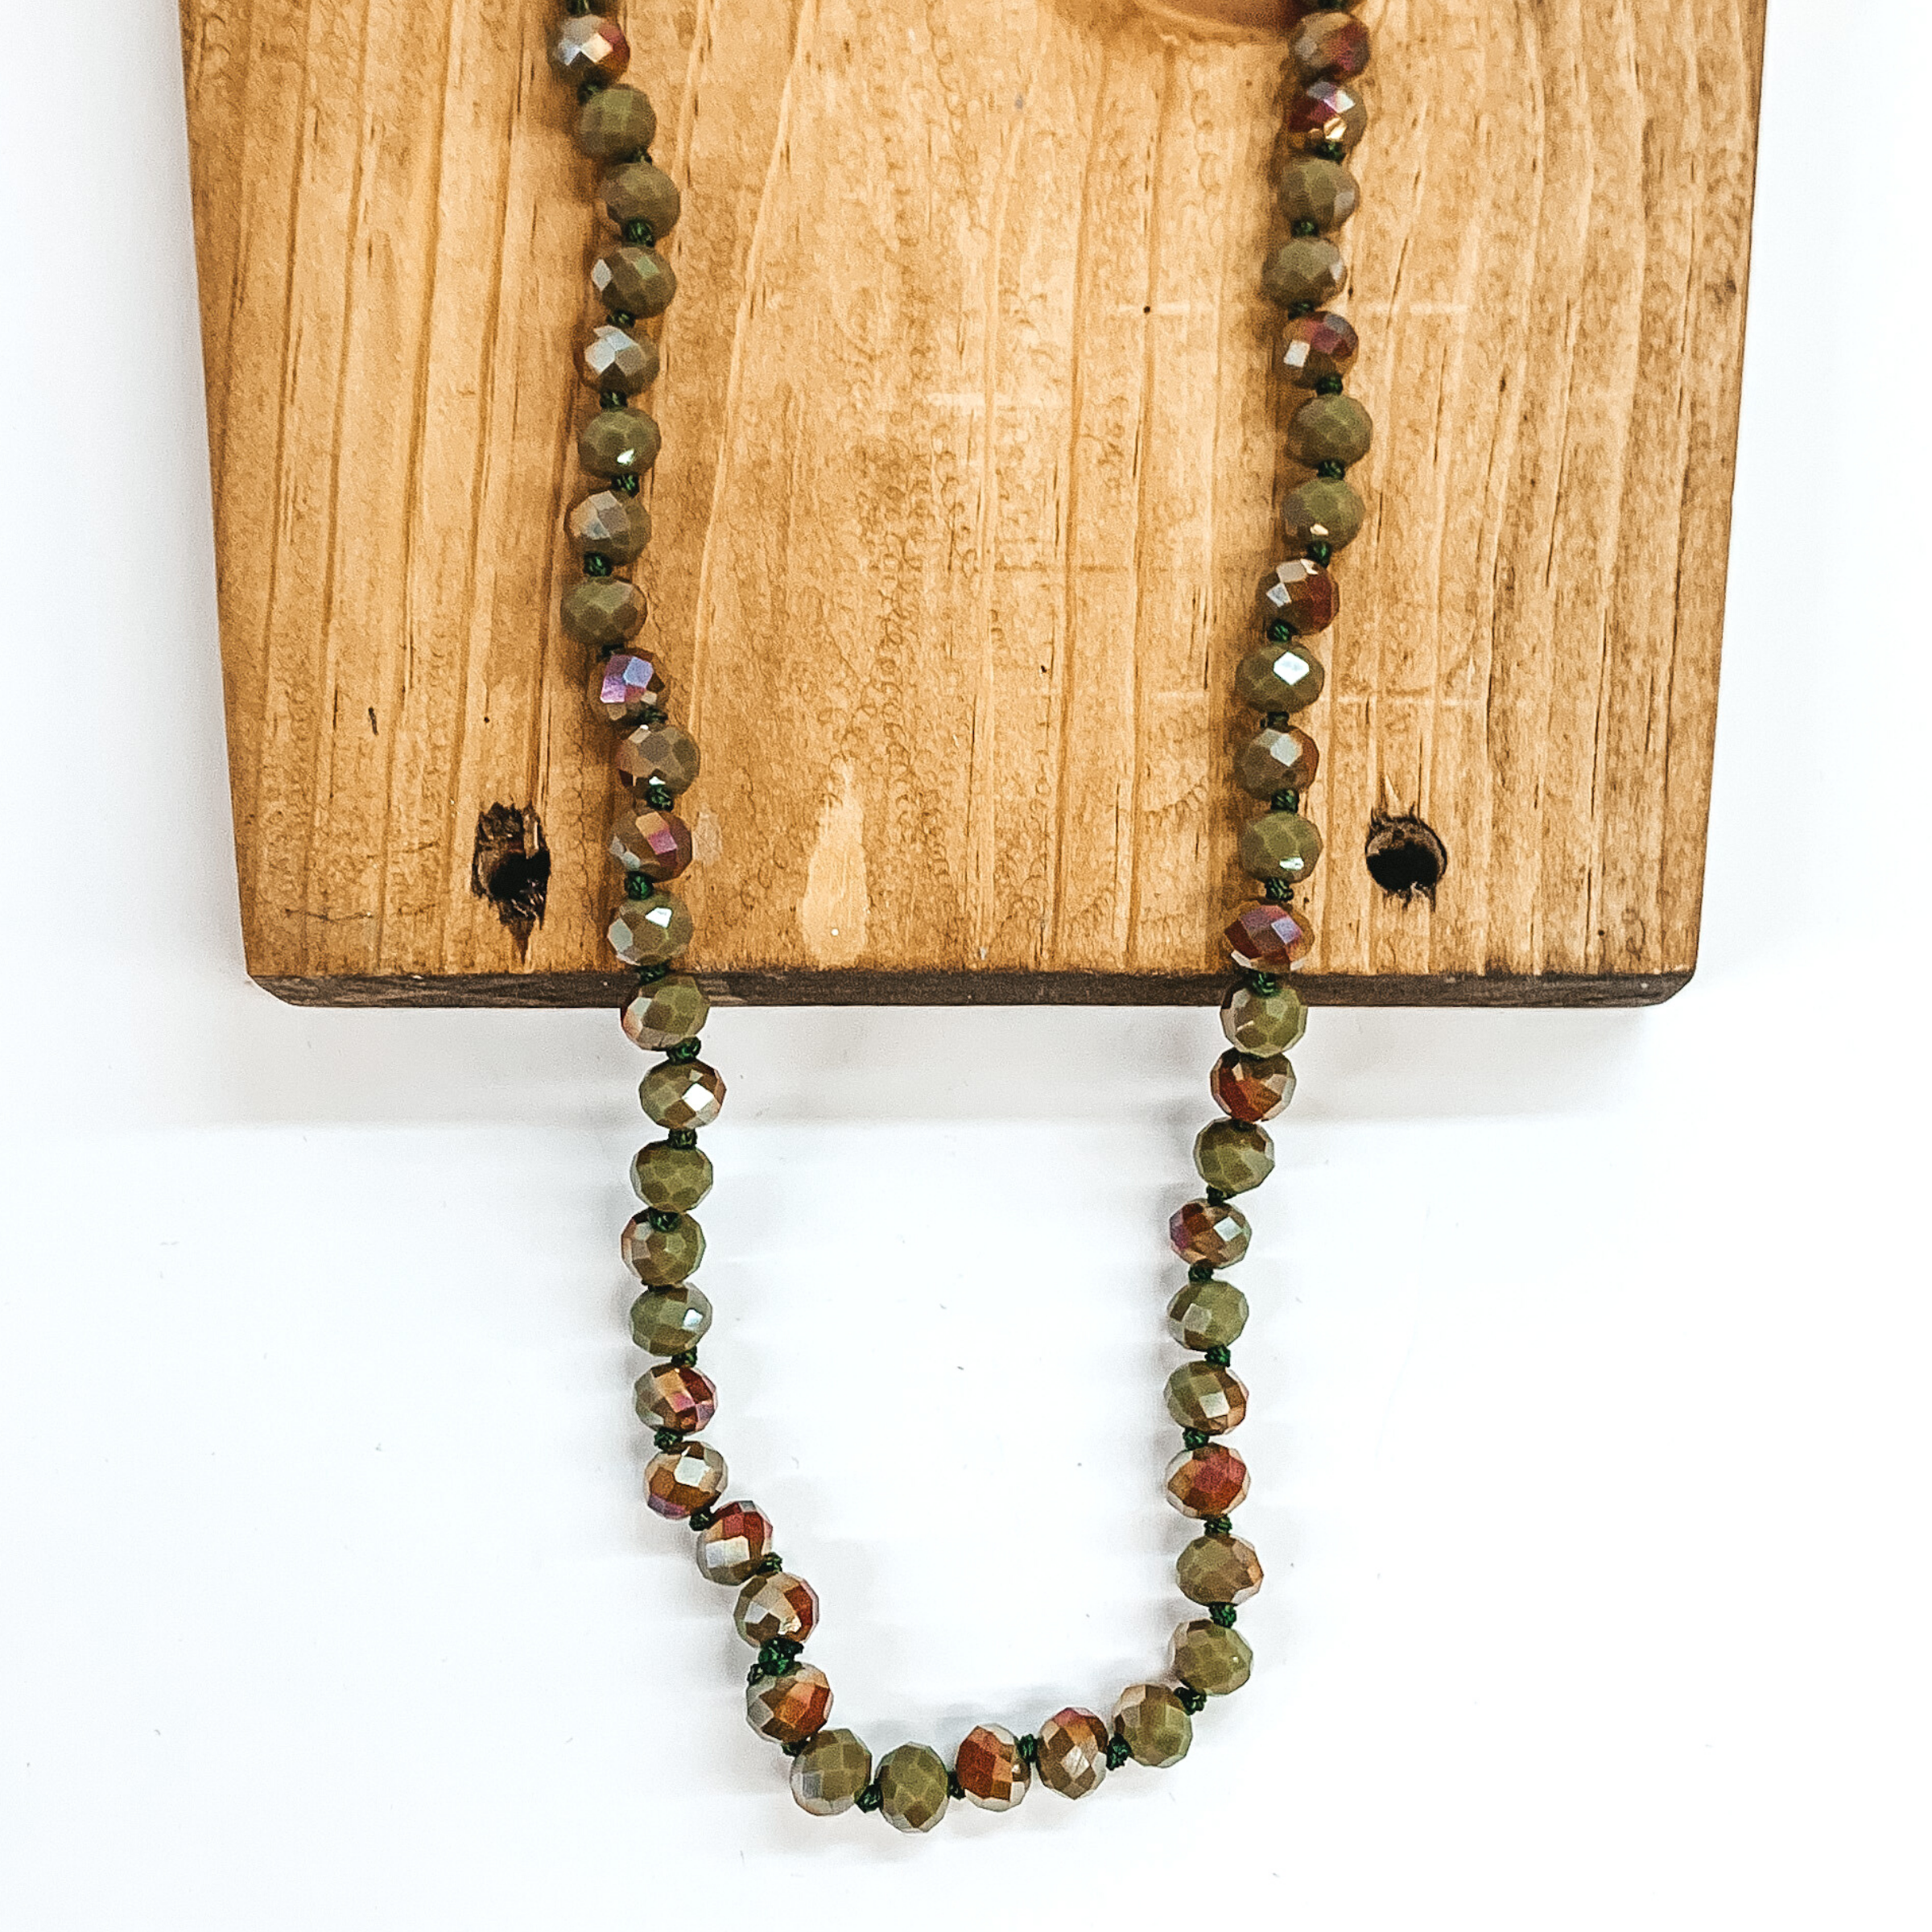 Camo green crystal beaded necklace. This necklace is pictured on a brown block on a white background. This necklace is laying on top of a brown block on a white background.